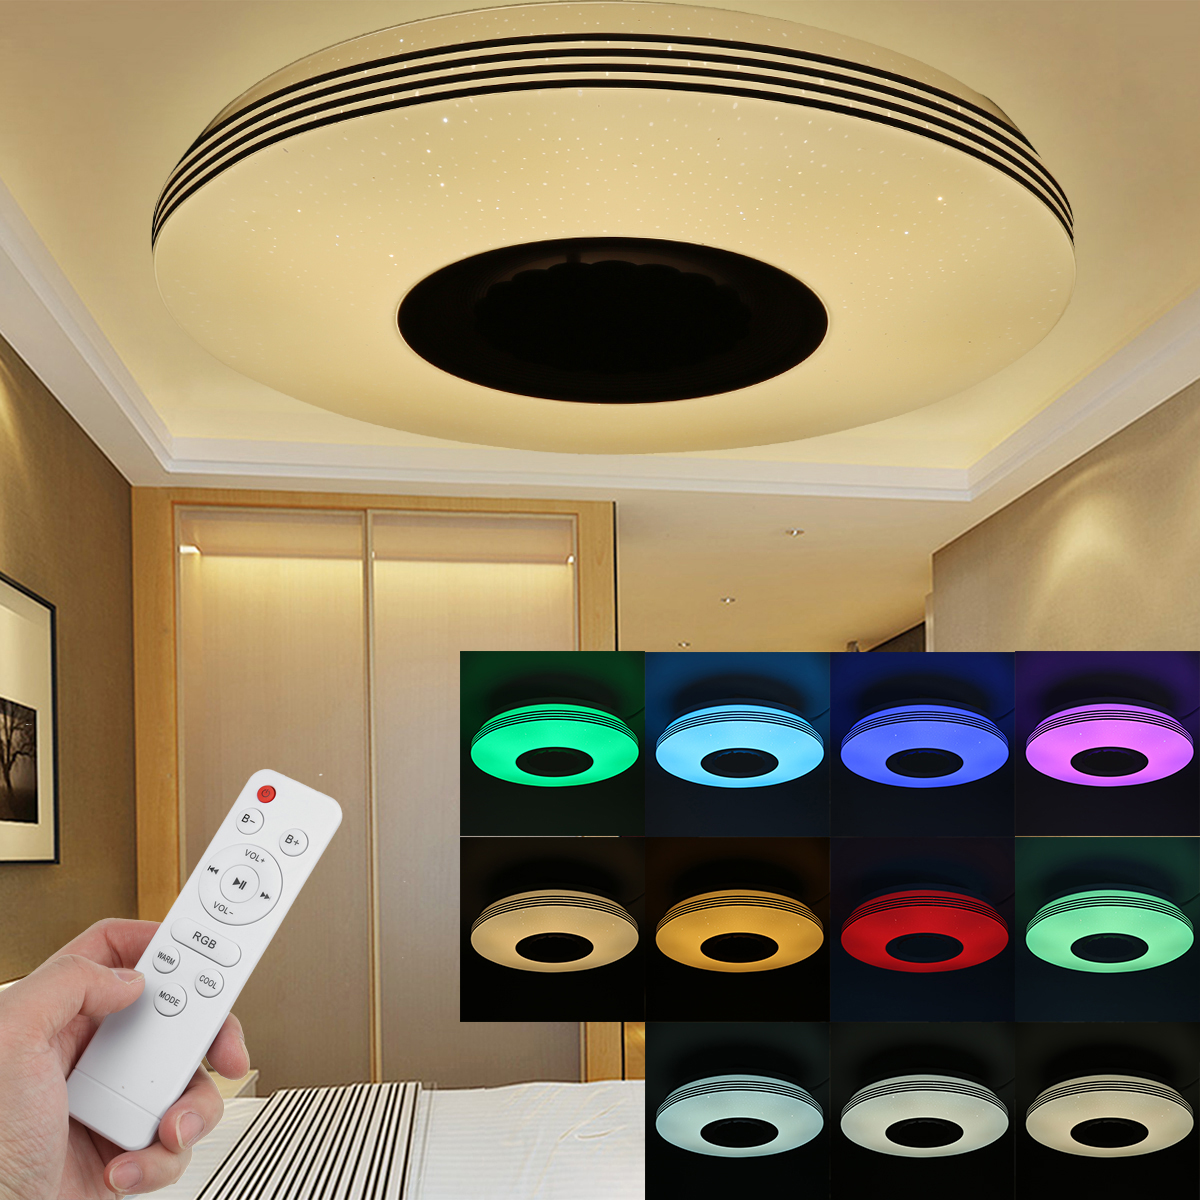 Find 34cm LED Ceiling Light RGB bluetooth Music Speaker Dimmer APP Remote Control Lamps for Sale on Gipsybee.com with cryptocurrencies